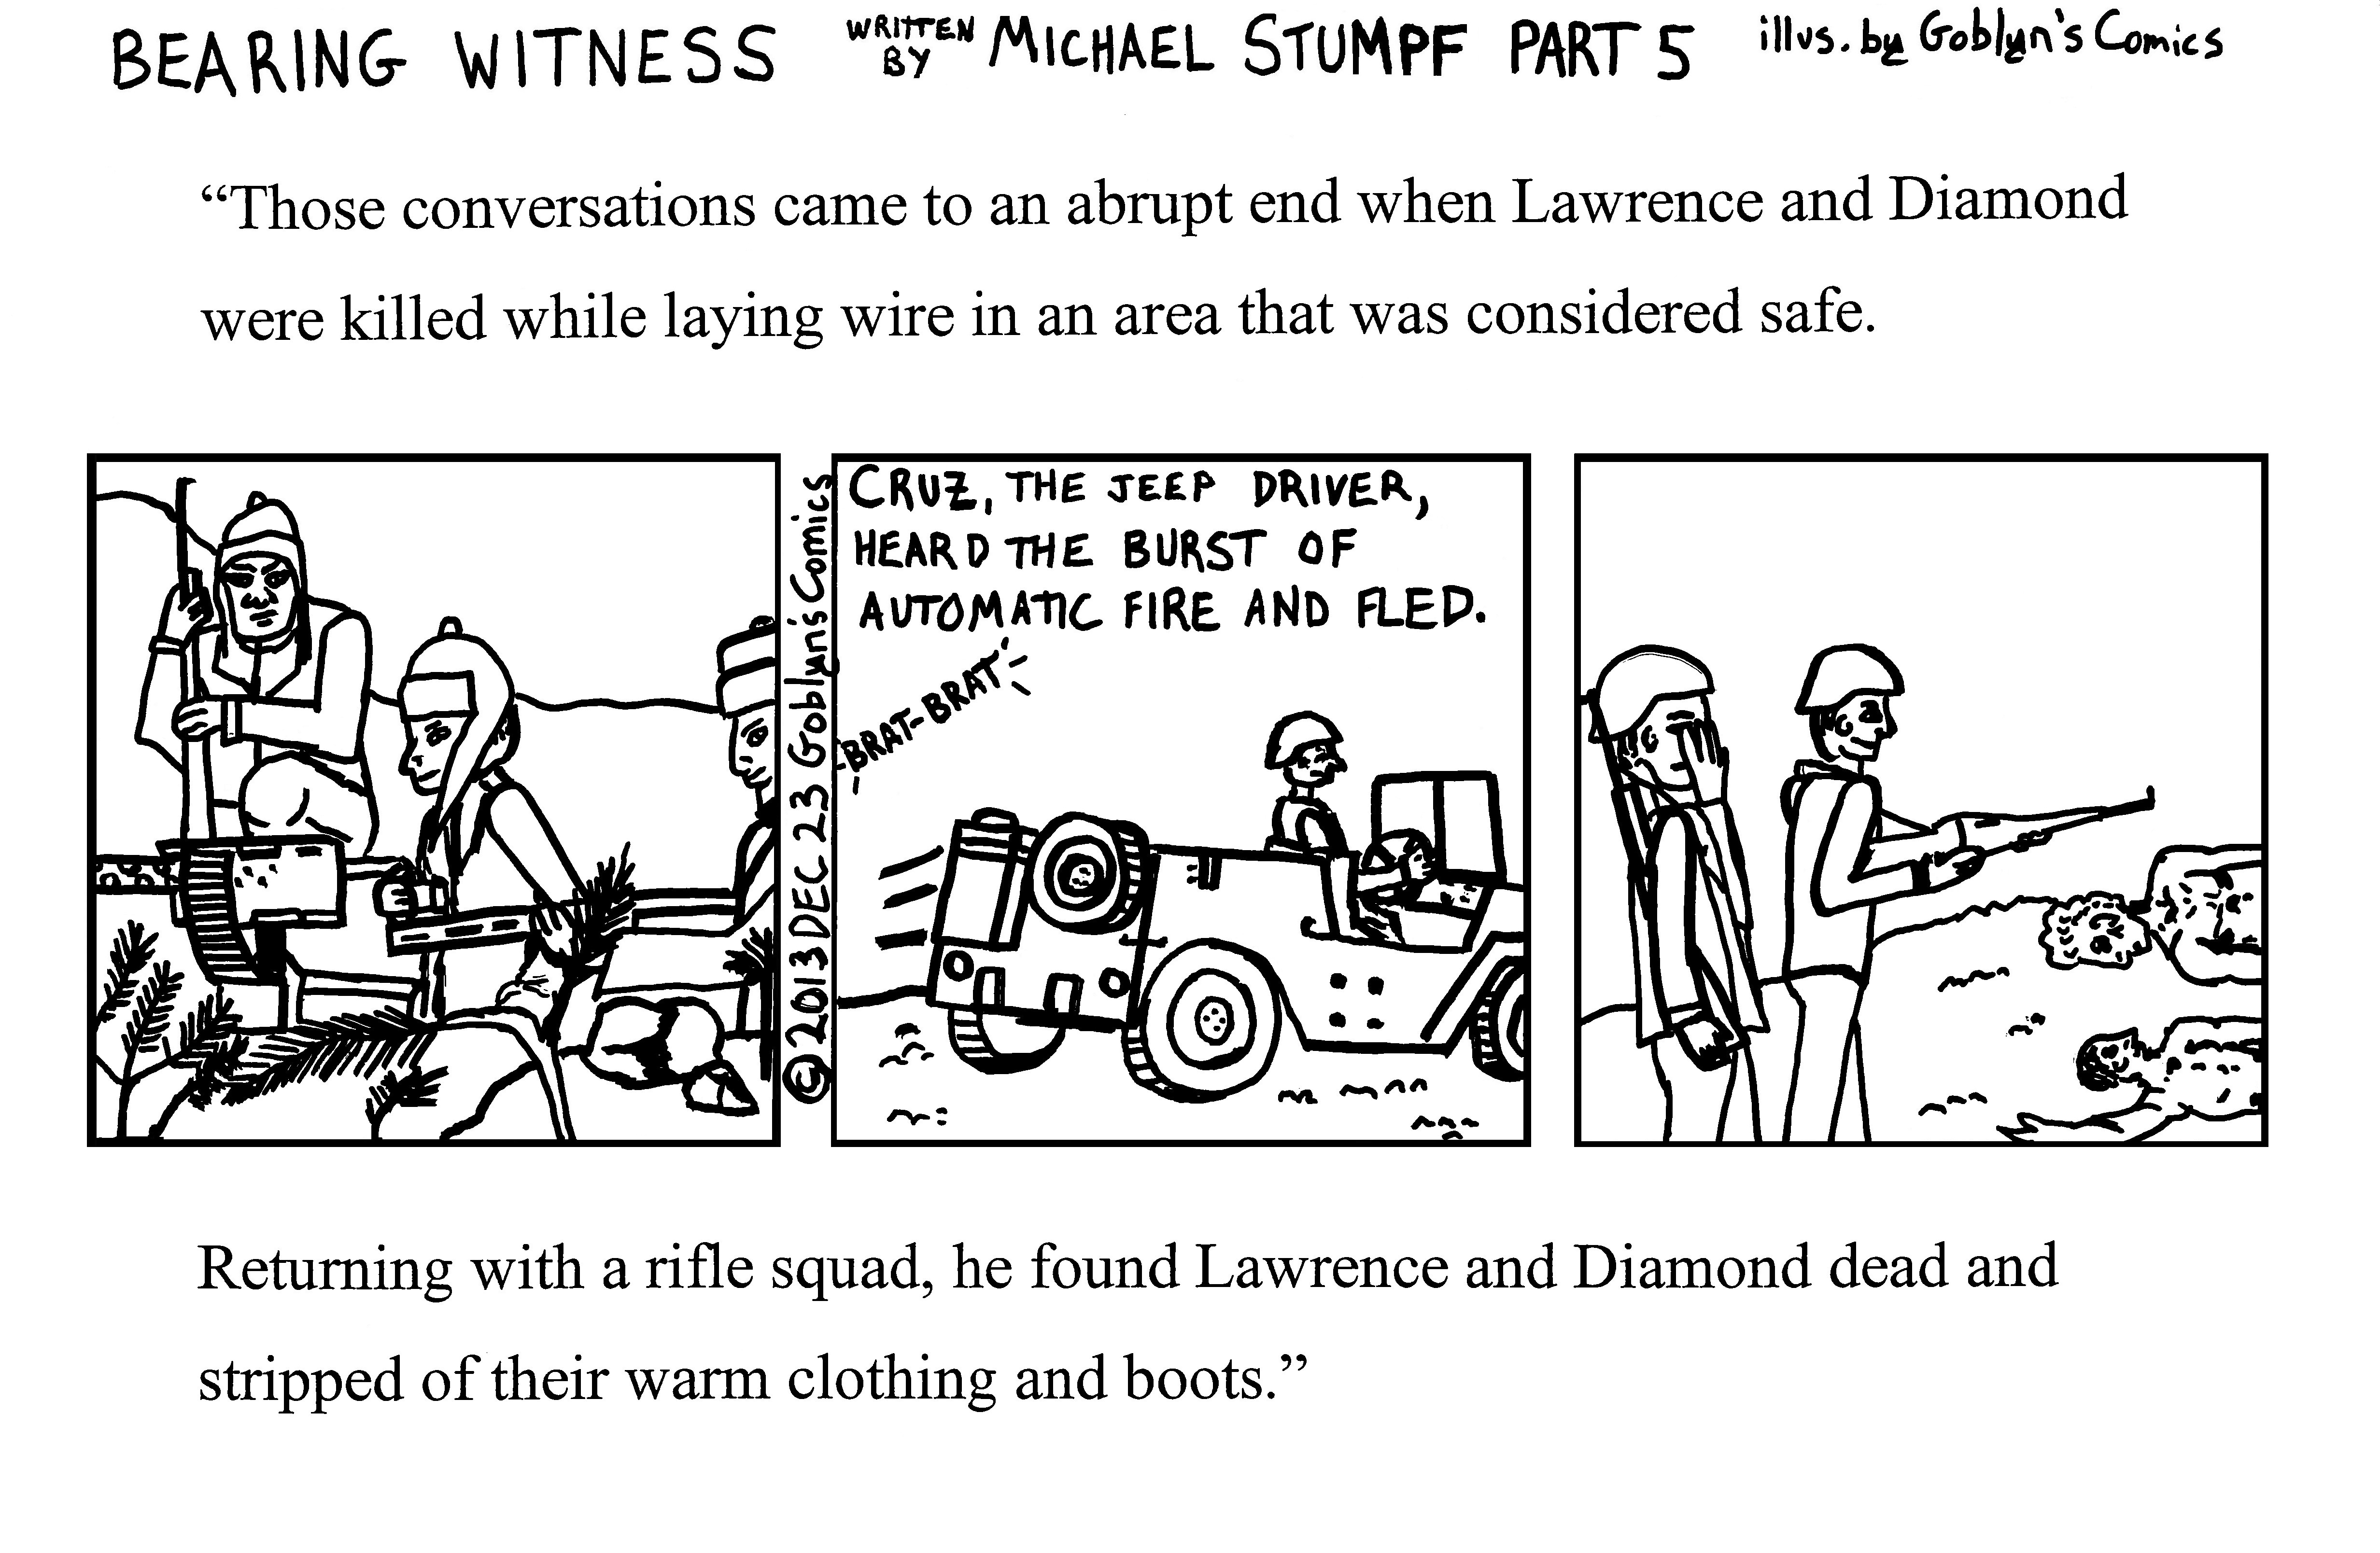 Bearing Witness Part 5 by Micahel Stumpf - Returning with a rifle squad, he found Lawrence and Diamond dead and stripped of their warm clothing and boots.